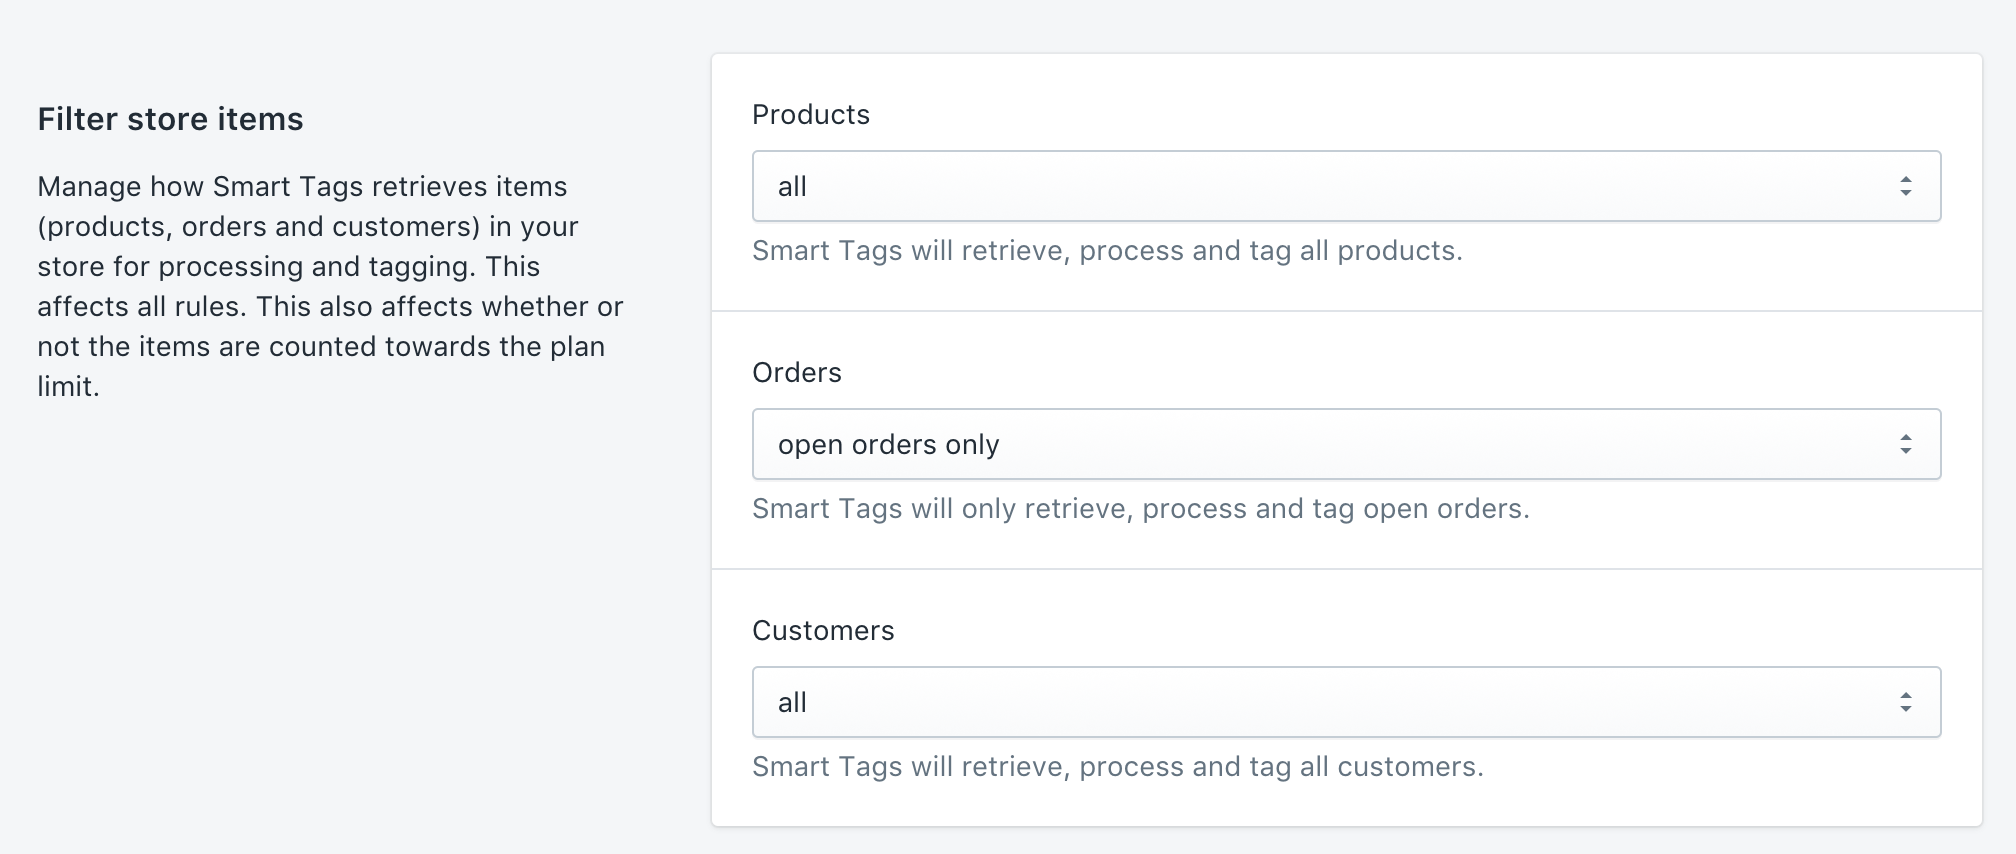 Filter which items to retrieve, process and tag